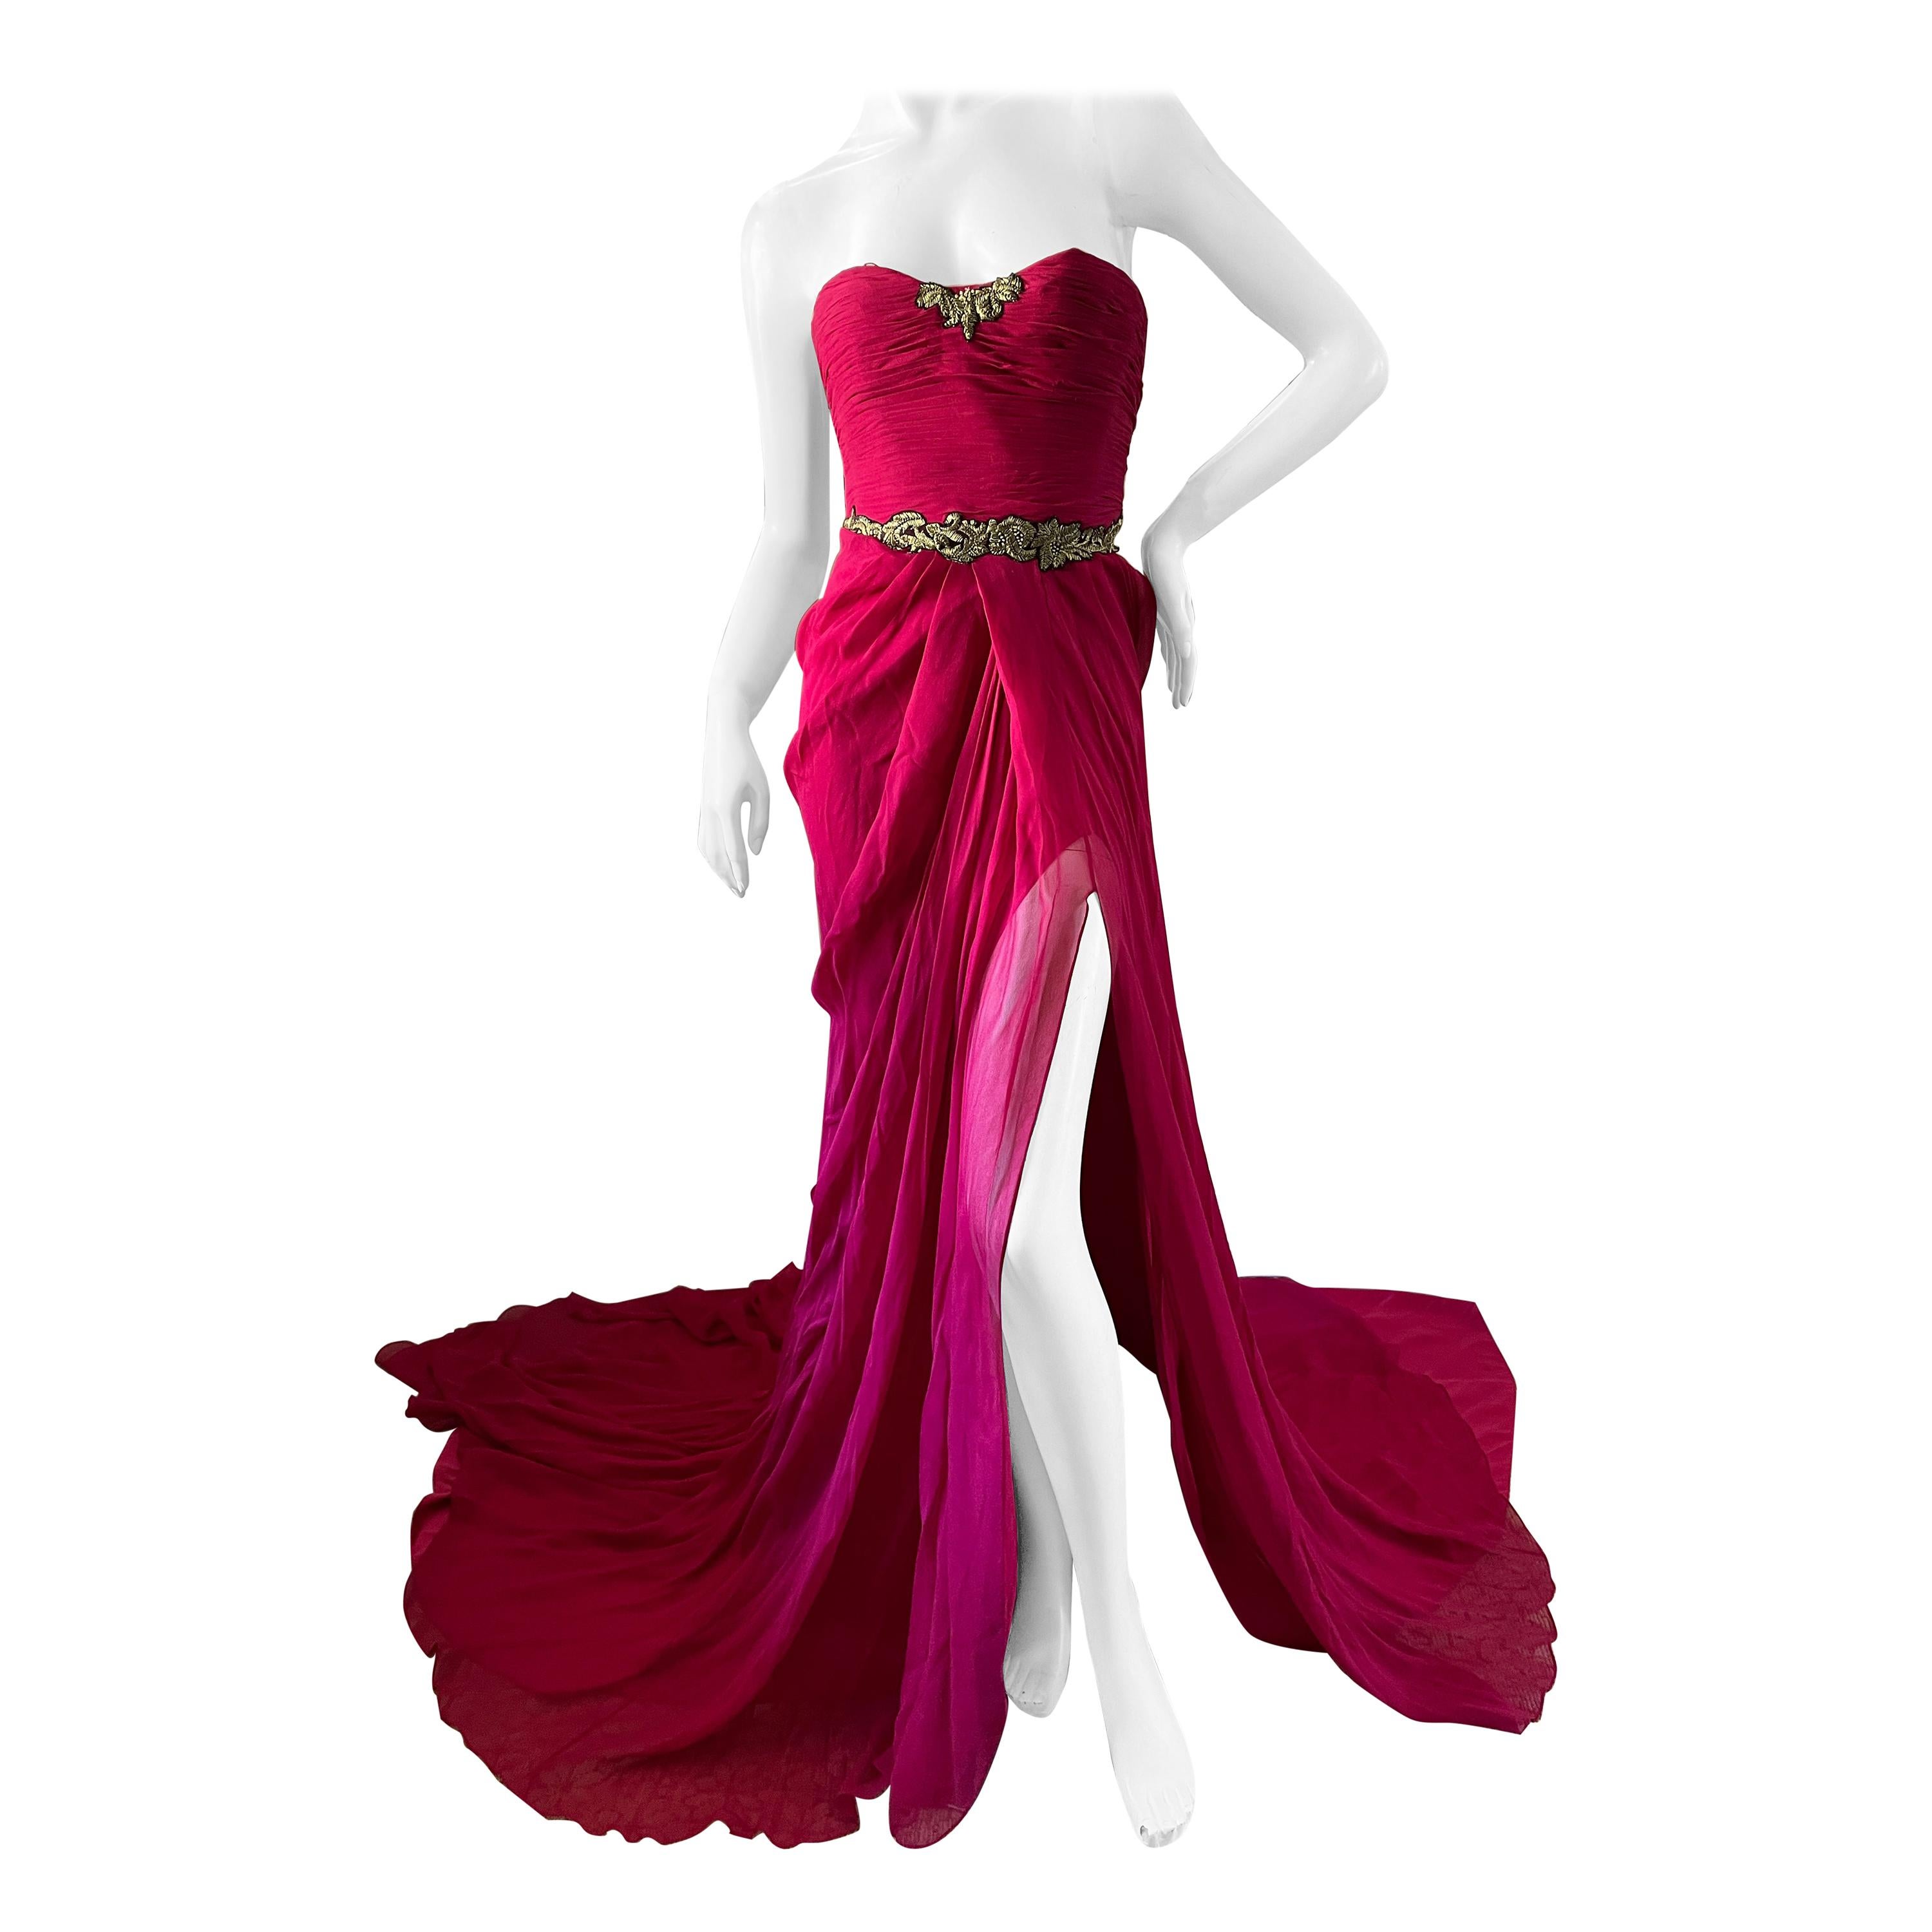 Jason Wu Spring 2011 Dramatic Strapless Red Evening Dress with Train For Sale